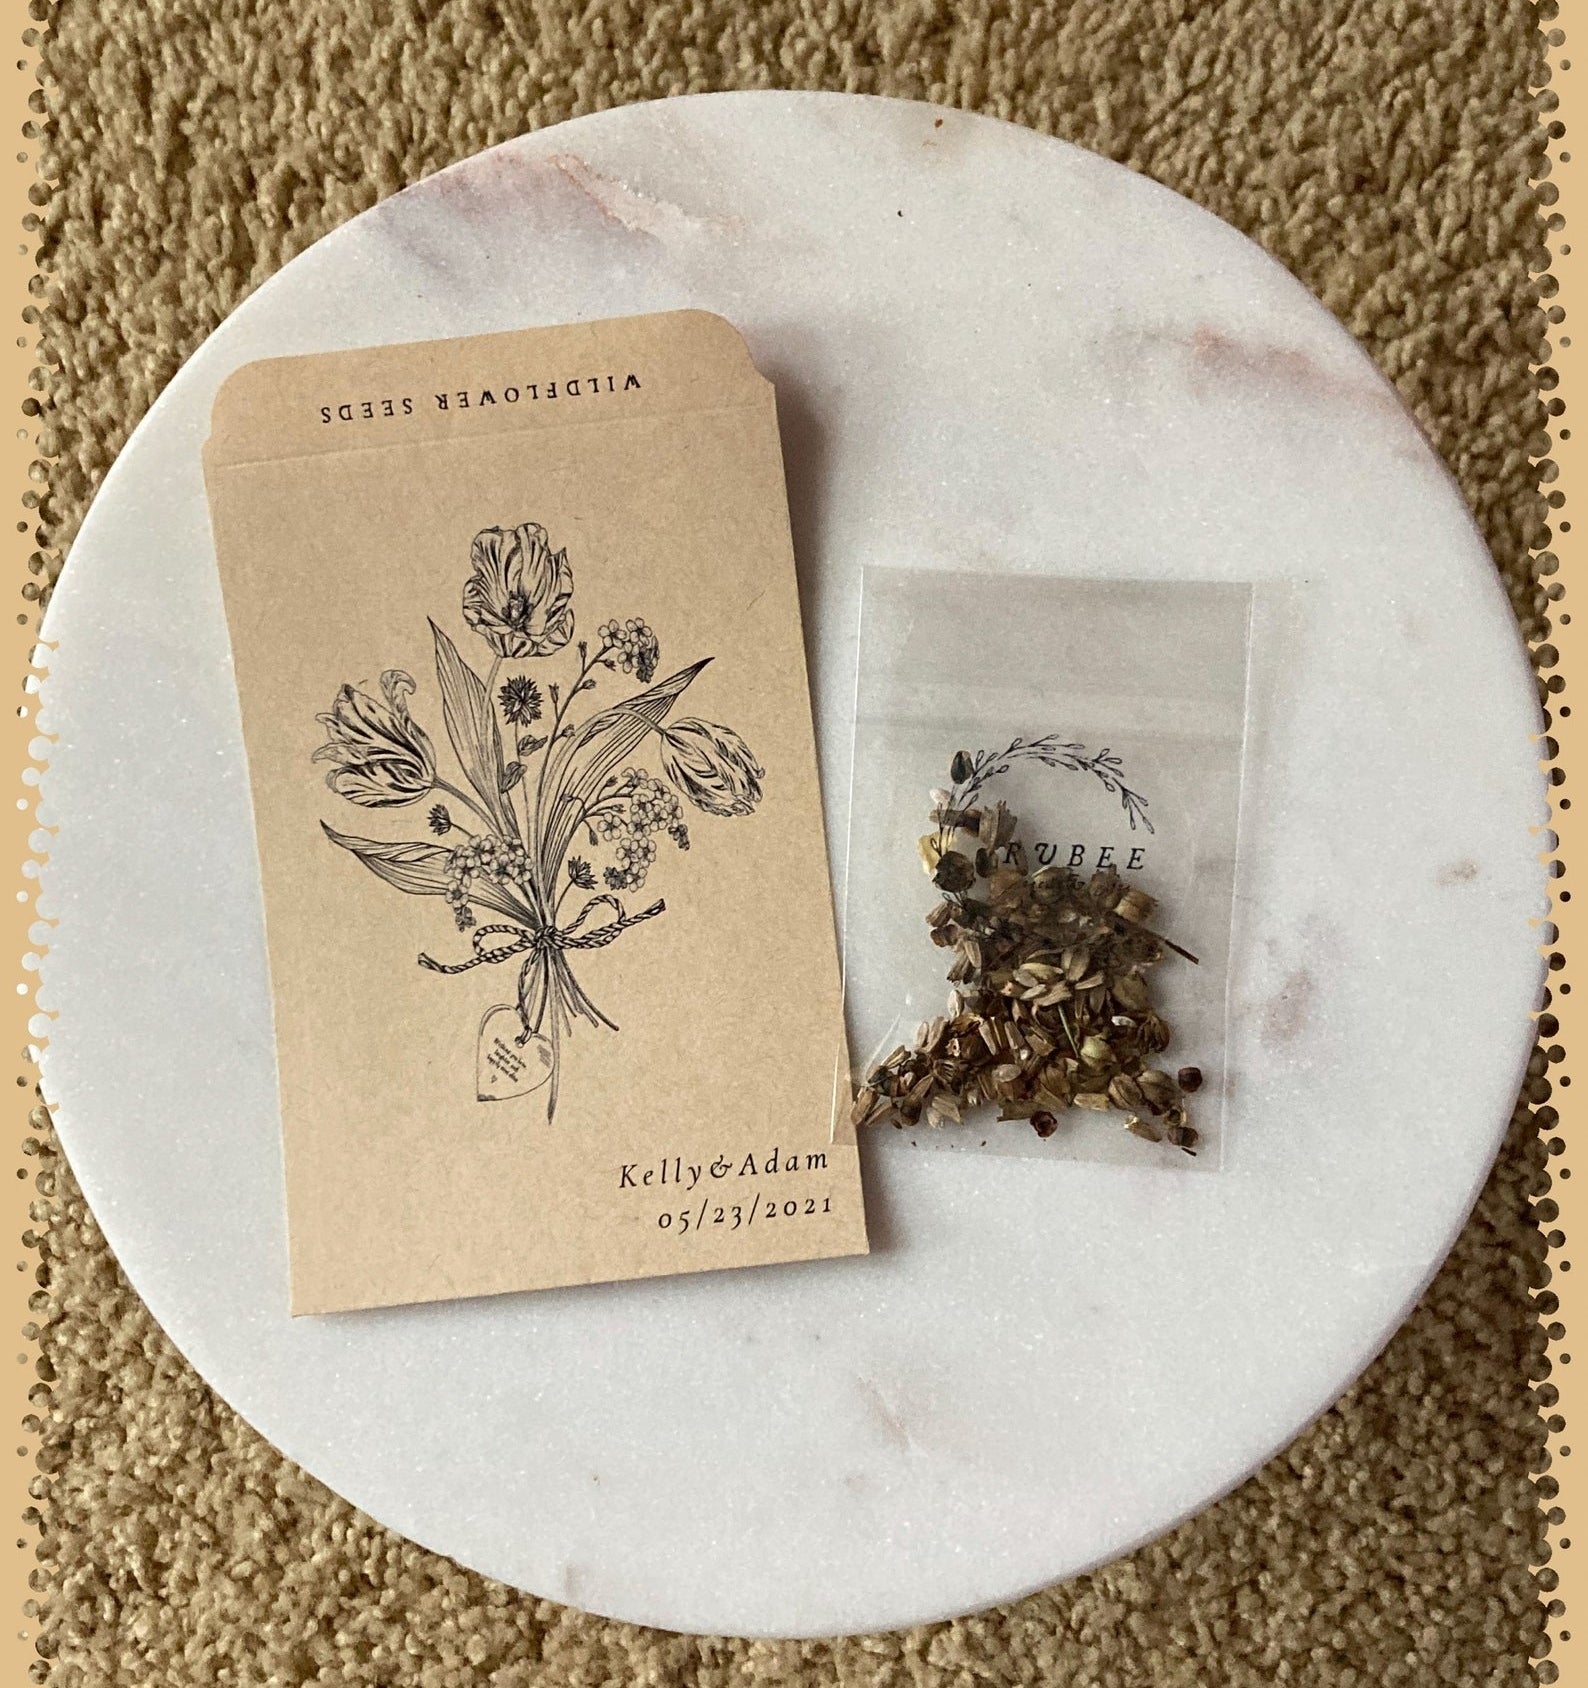 the customized seed packet